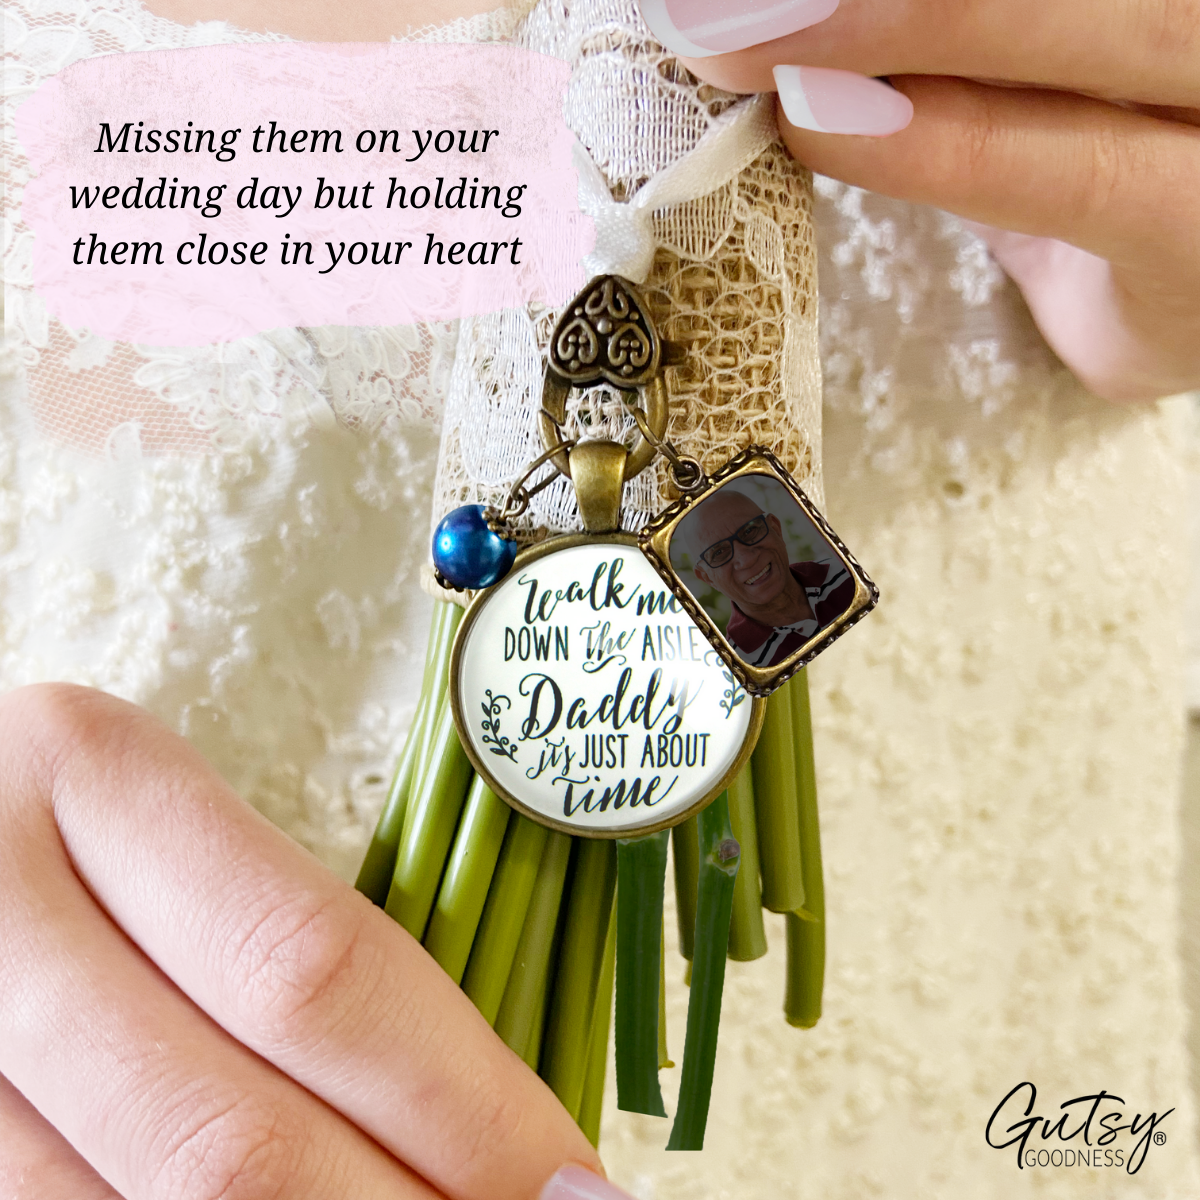 Wedding Bouquet Charm Walk Me Down Aisle Daddy Rustic Memory White Blue Photo Frame - Gutsy Goodness;Wedding Bouquet Charm Walk Me Down Aisle Daddy Rustic Memory White Blue Photo Frame - Gutsy Goodness Handmade Jewelry Gifts